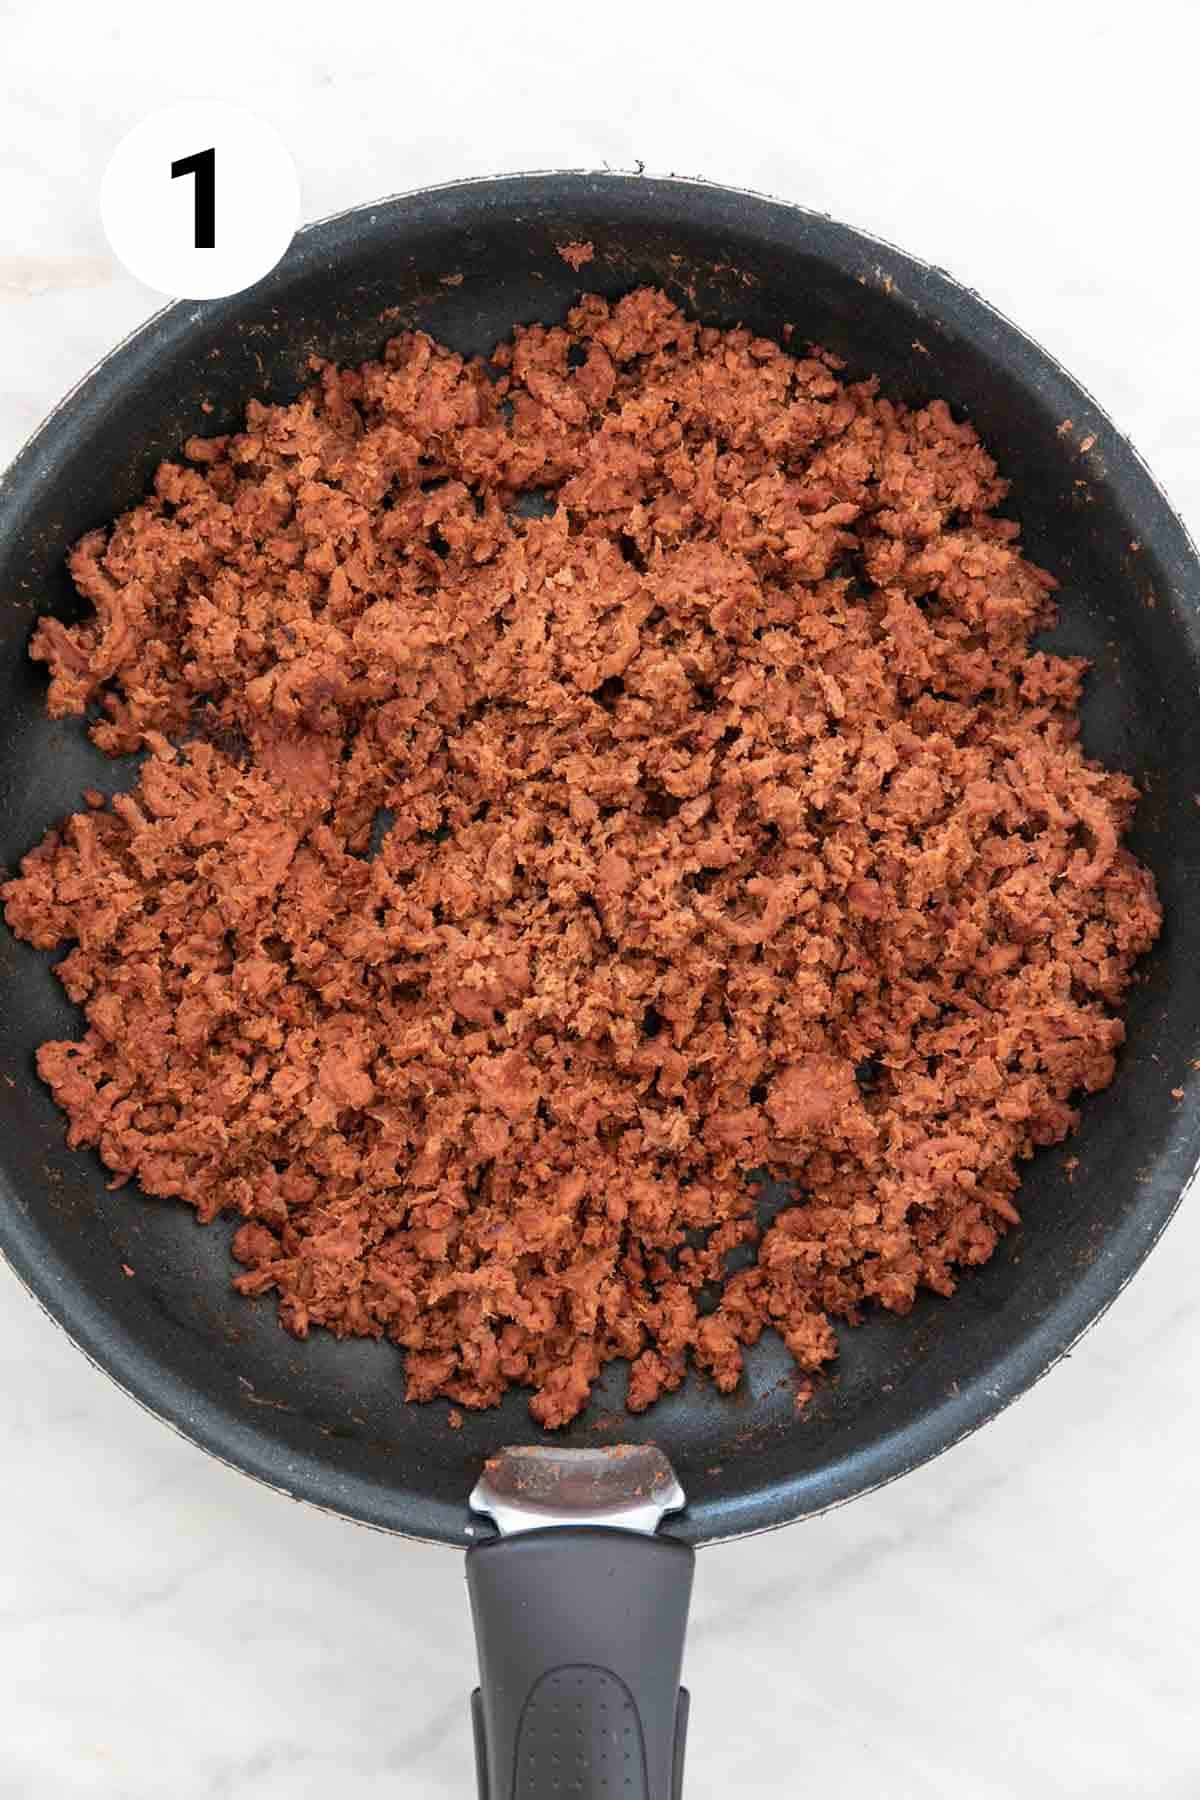 Vegan ground beef cooked in a skillet.